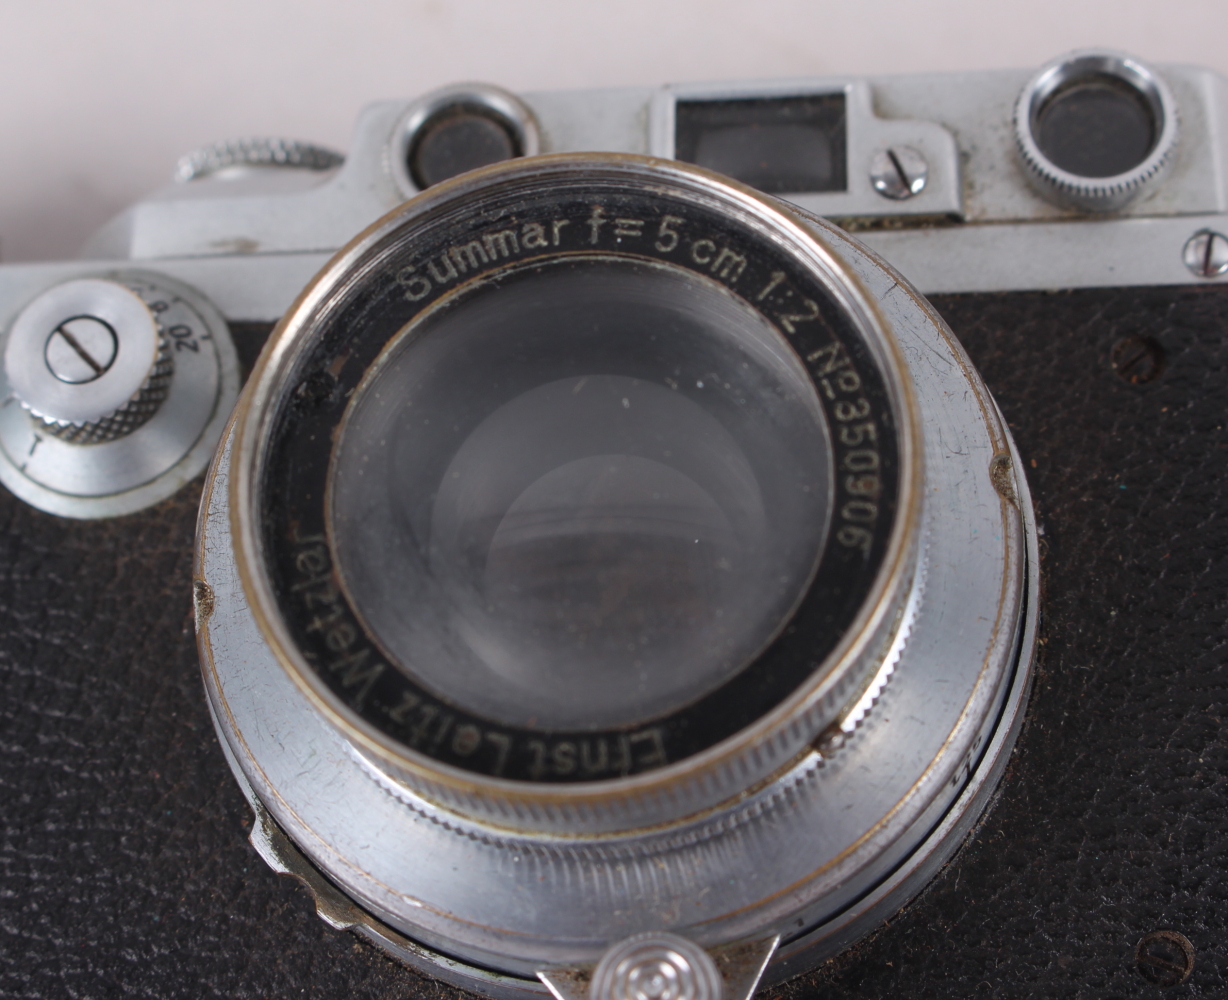 A Leica D R P Rangefinder camera, No 234416, summar f=5cm 1:2 No 350906 lens, in leather case - Image 5 of 9